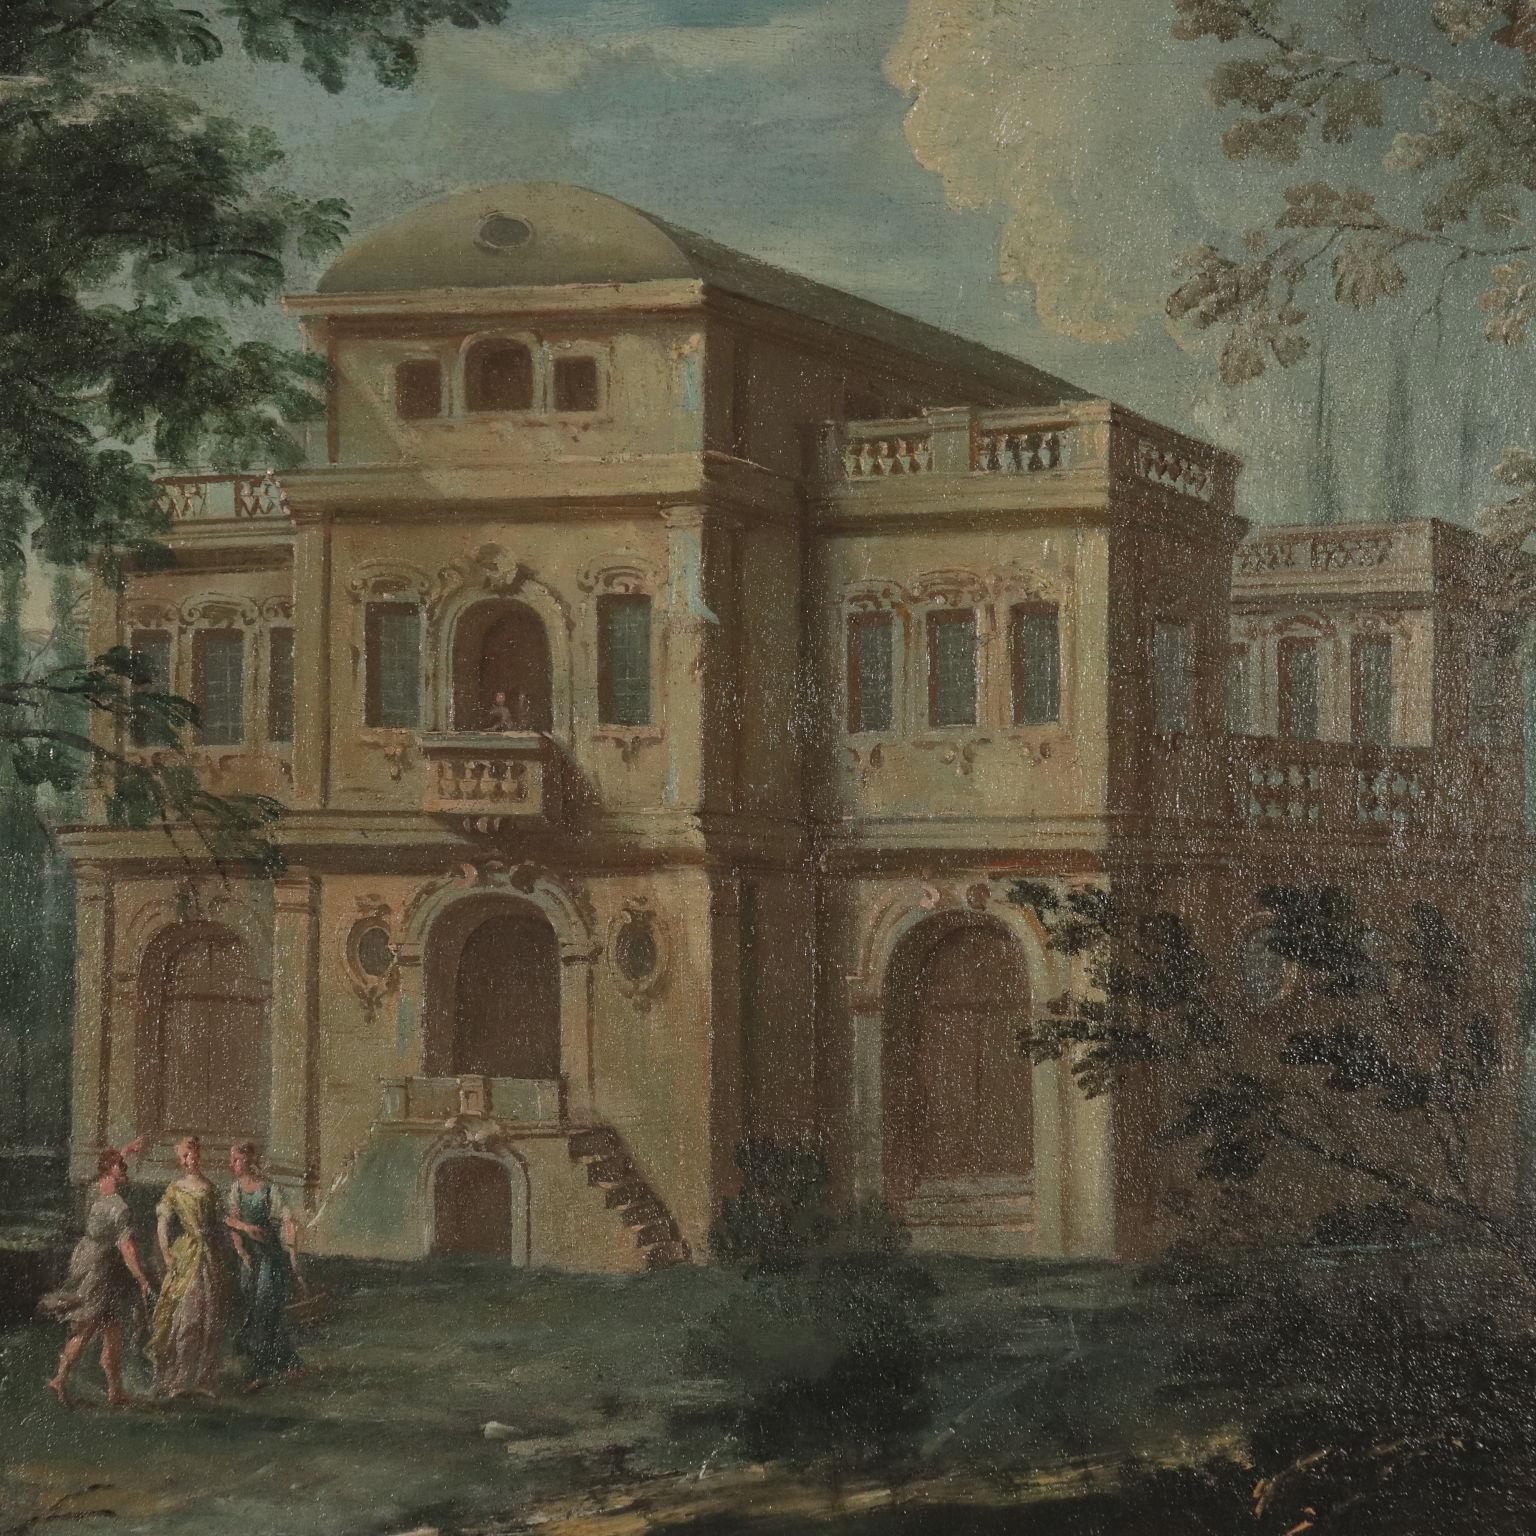 Landscape with Architecture and Figure, 18th Century. Allegory of Life in a Vill - Other Art Style Painting by Unknown